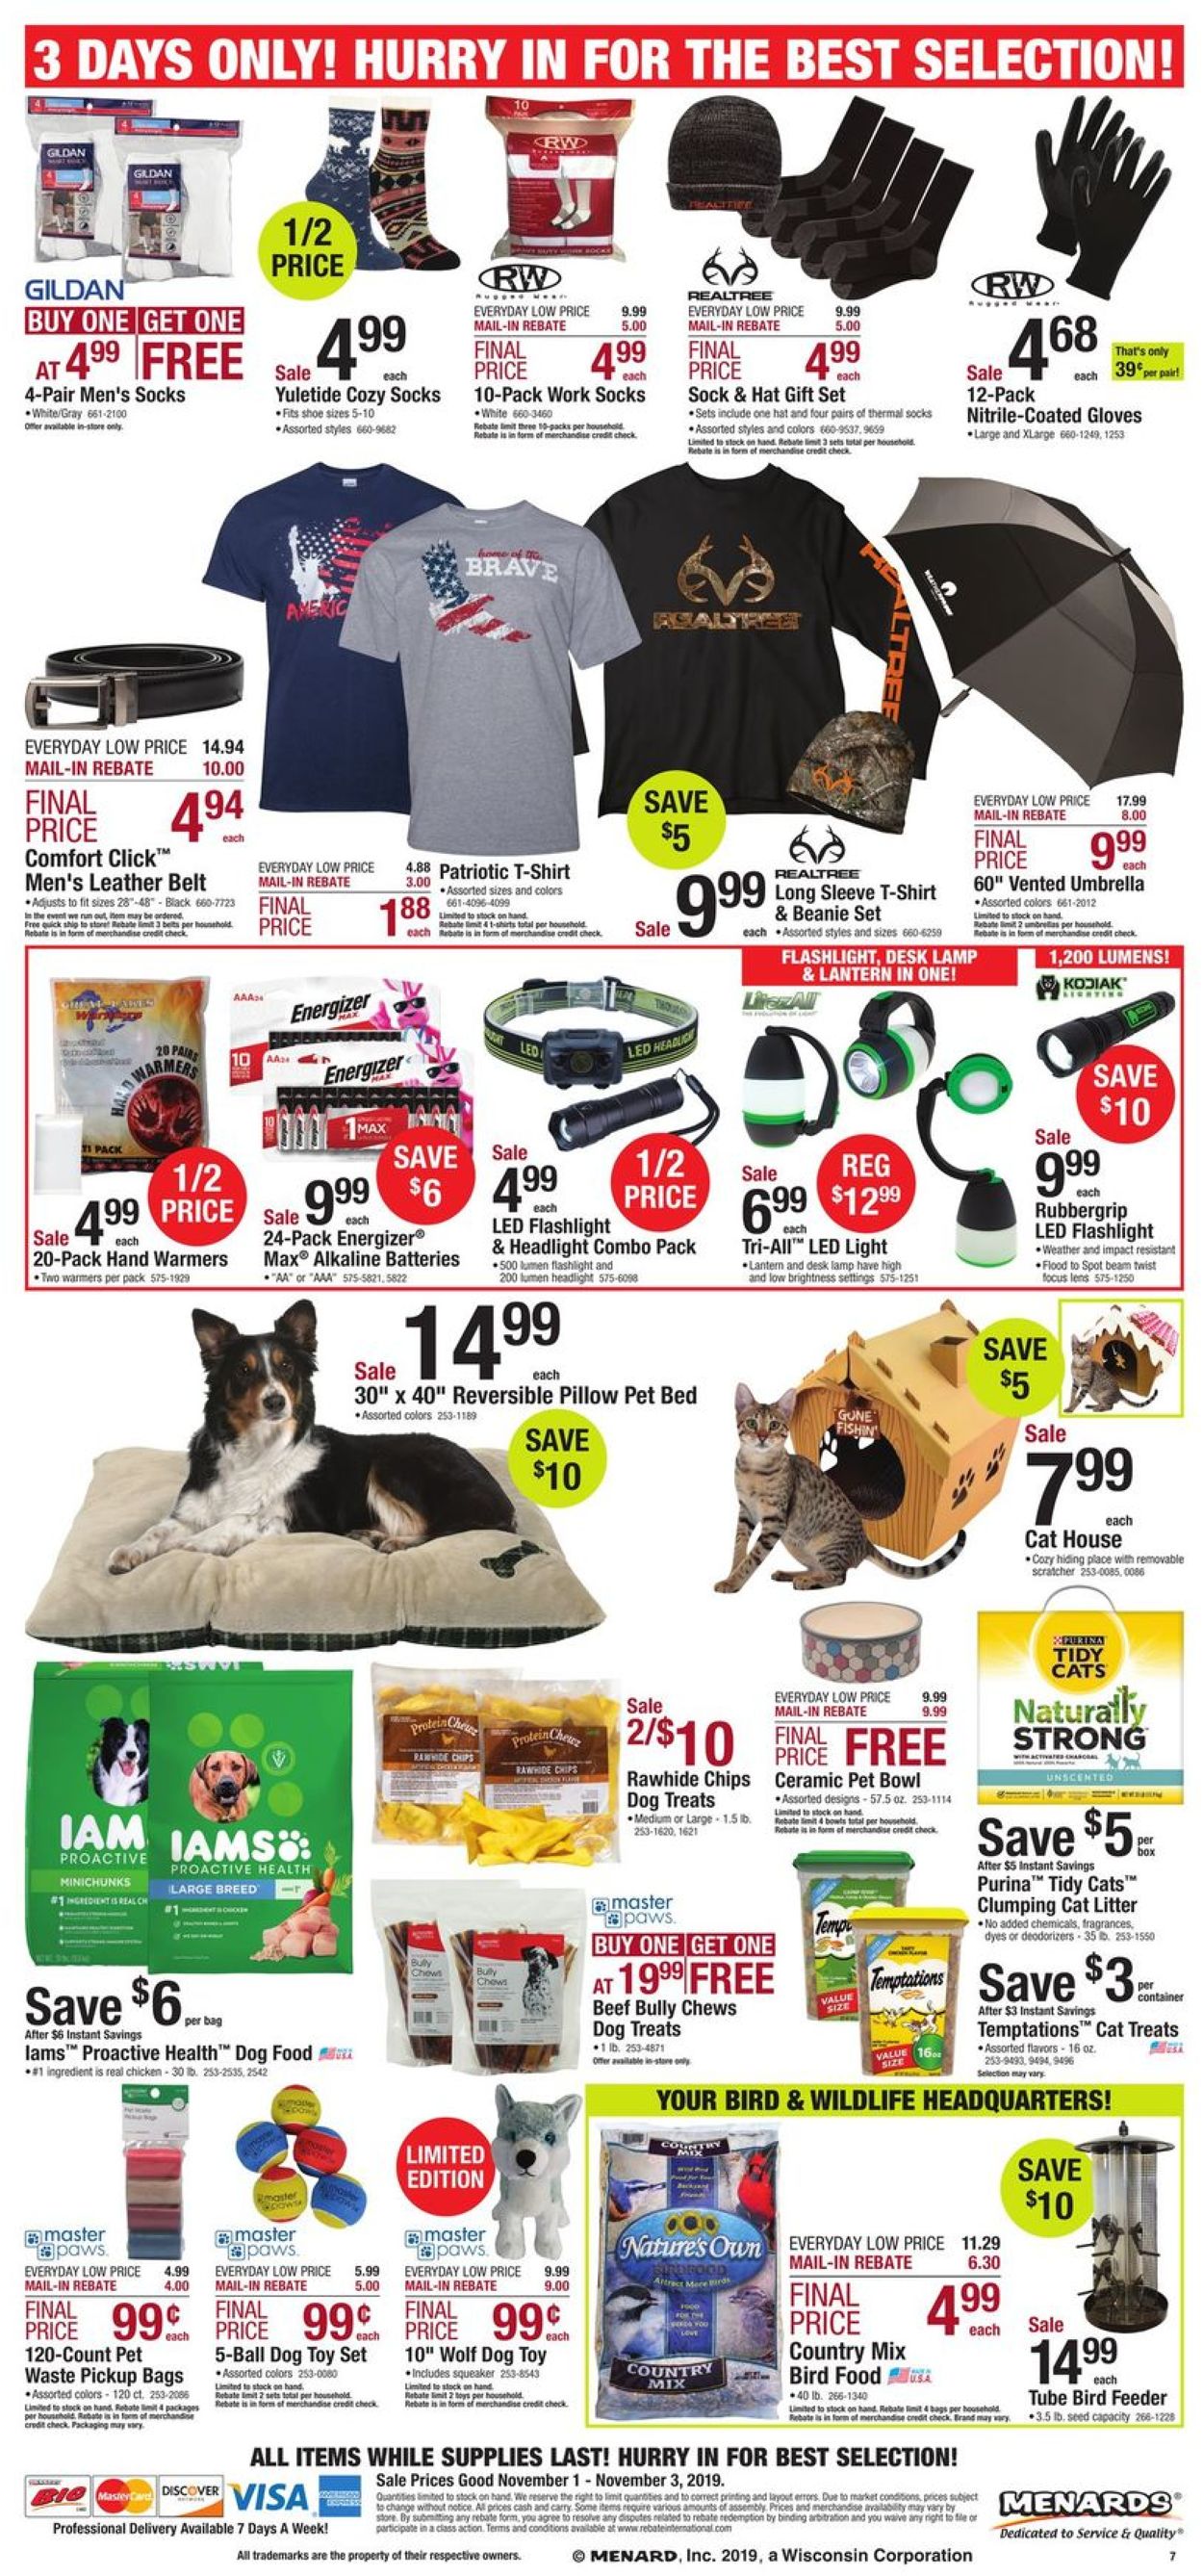 Menards - Black Friday 2019 Current weekly ad 11/01 - 11/03/2019 [7] - 0